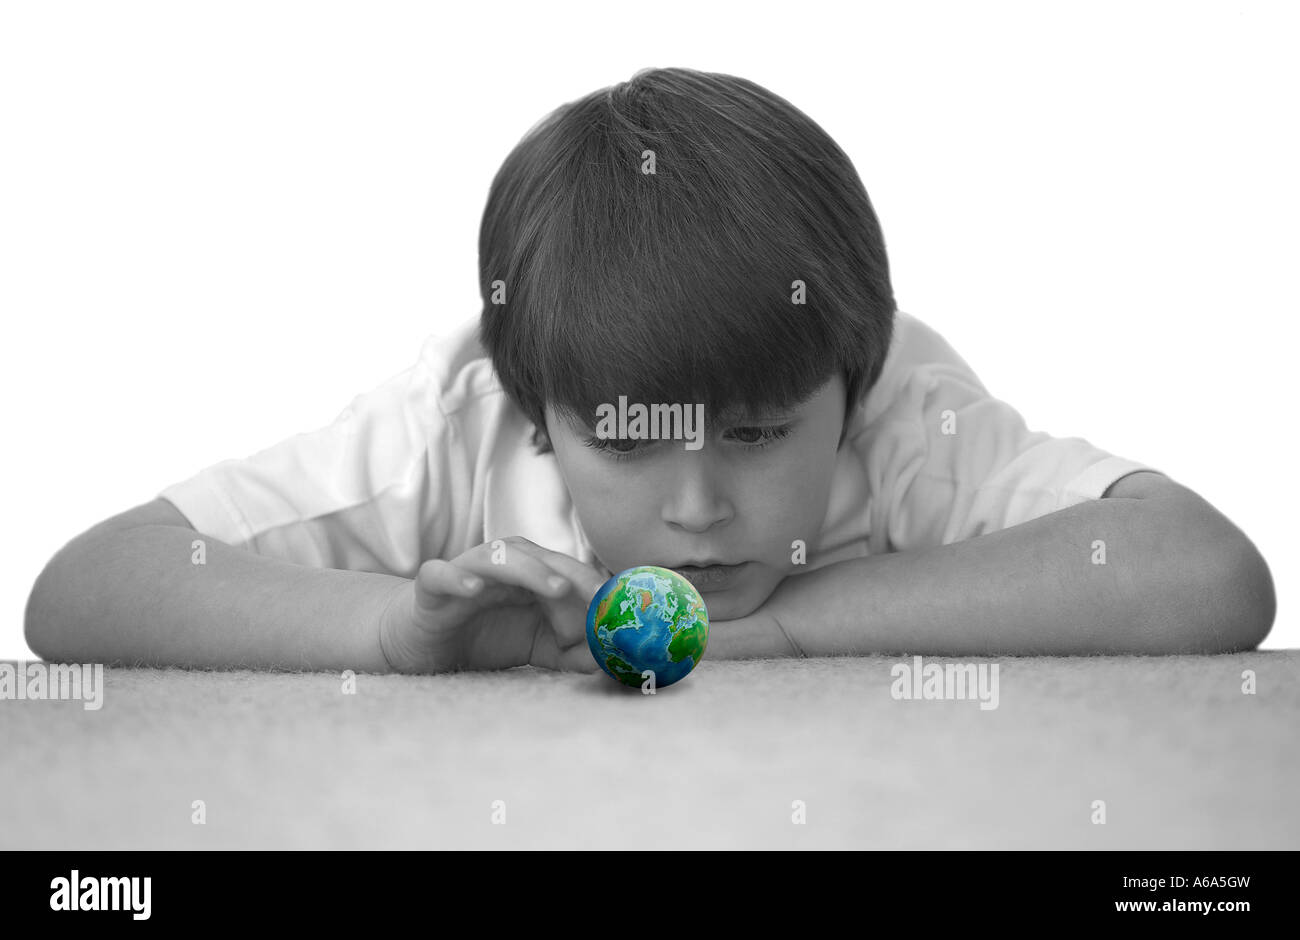 Black White concept image of a boy about to flick the world Stock Photo